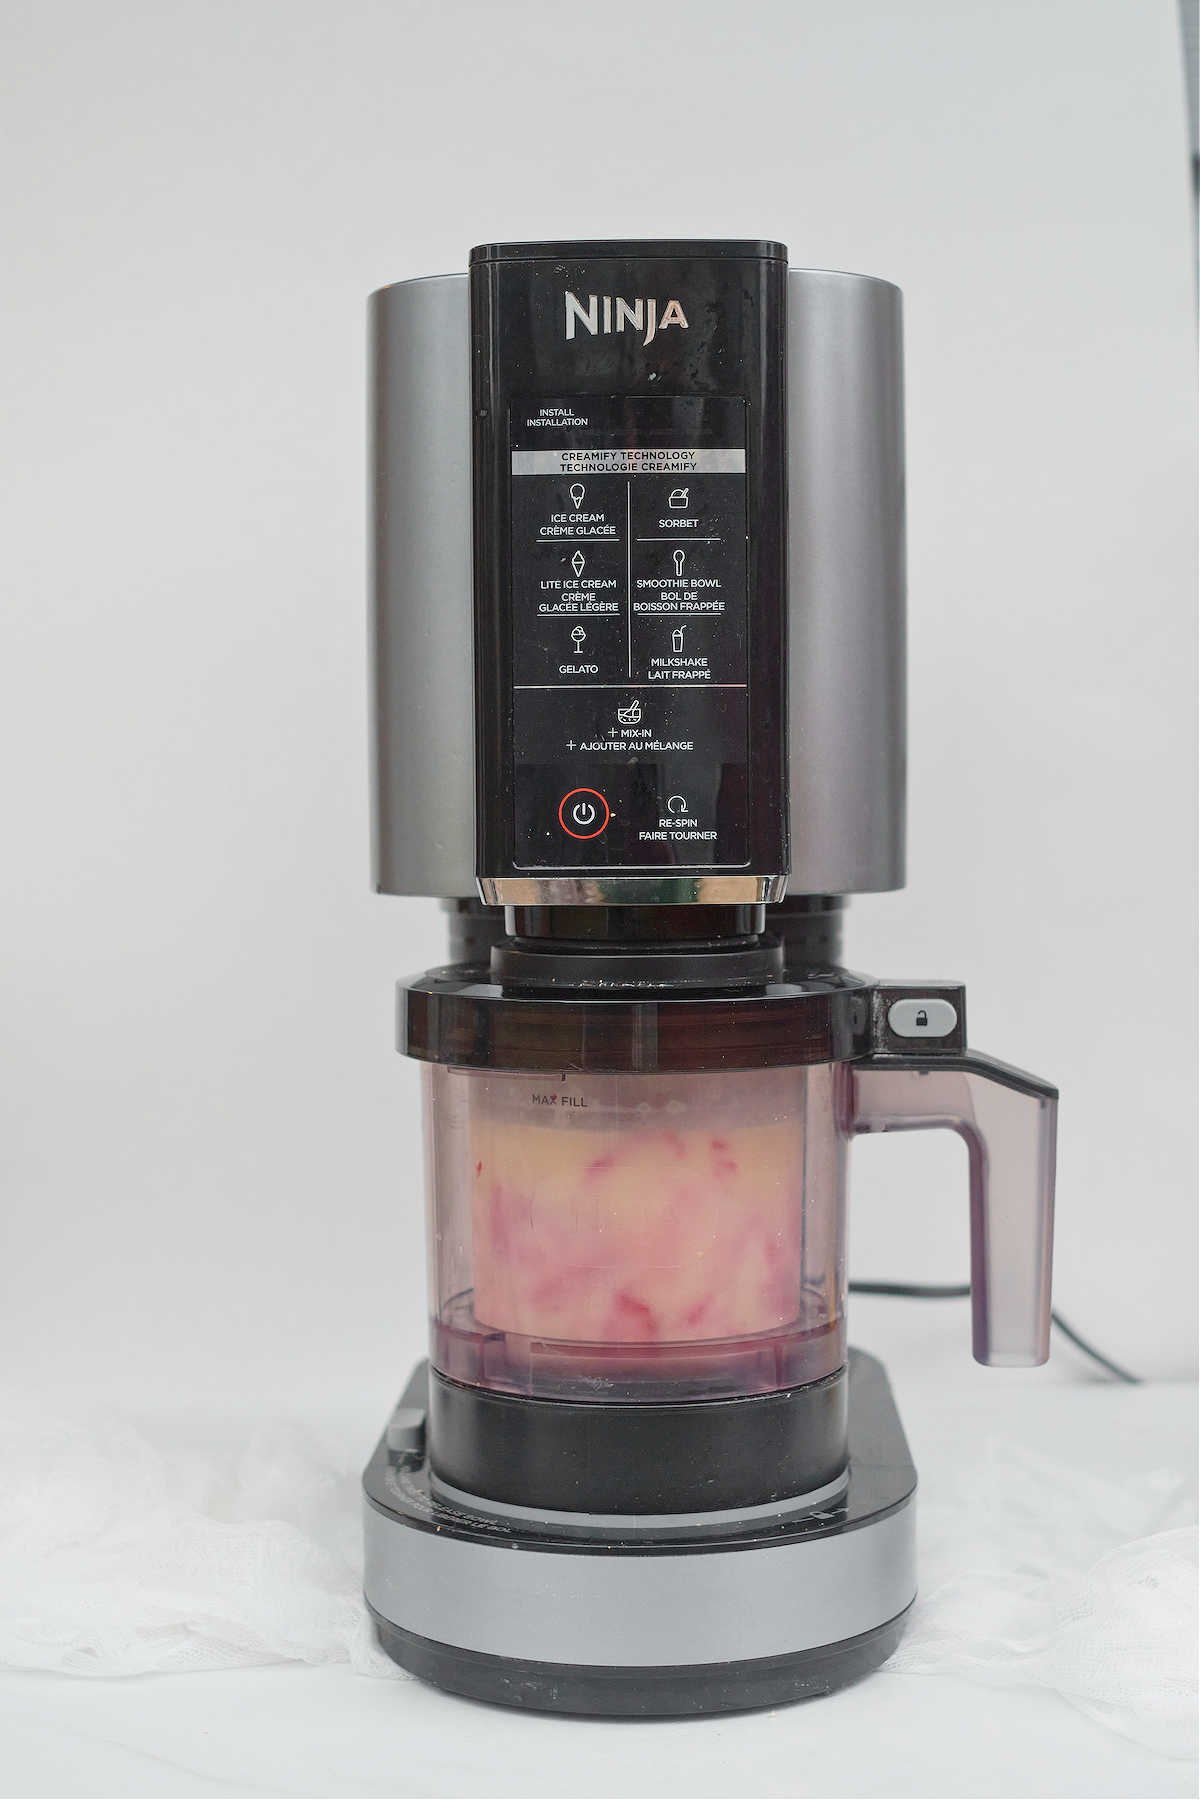 the frozen strawberry ice cream base being processed in the Ninja Creami machine